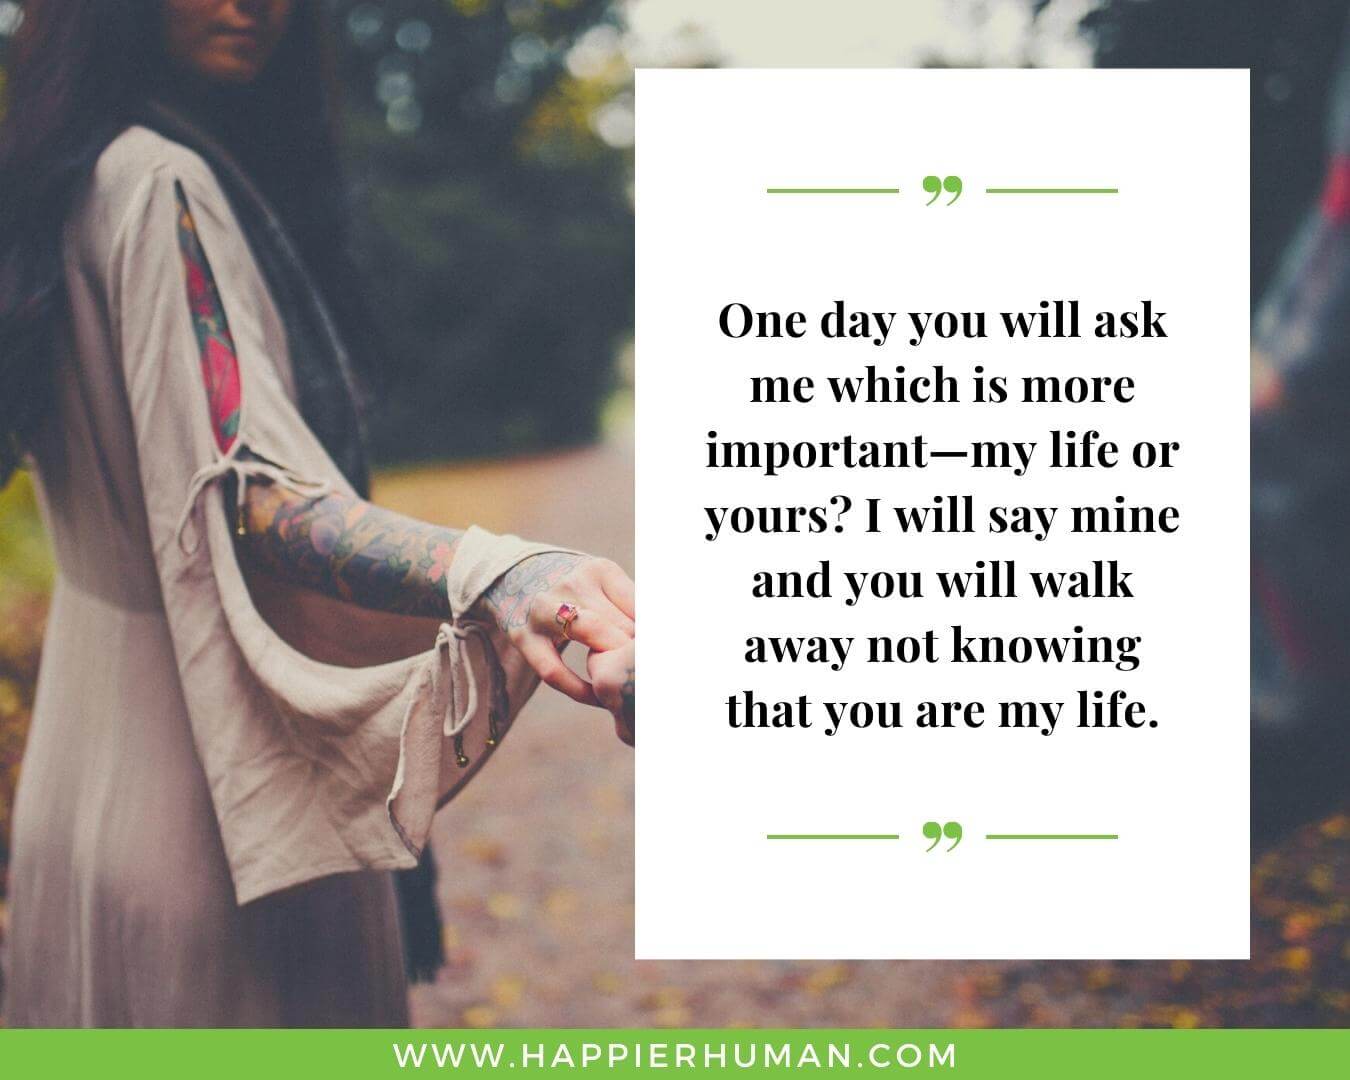 Messages of love to show Her you care- “One day you will ask me which is more important—my life or yours? I will say mine and you will walk away not knowing that you are my life.”